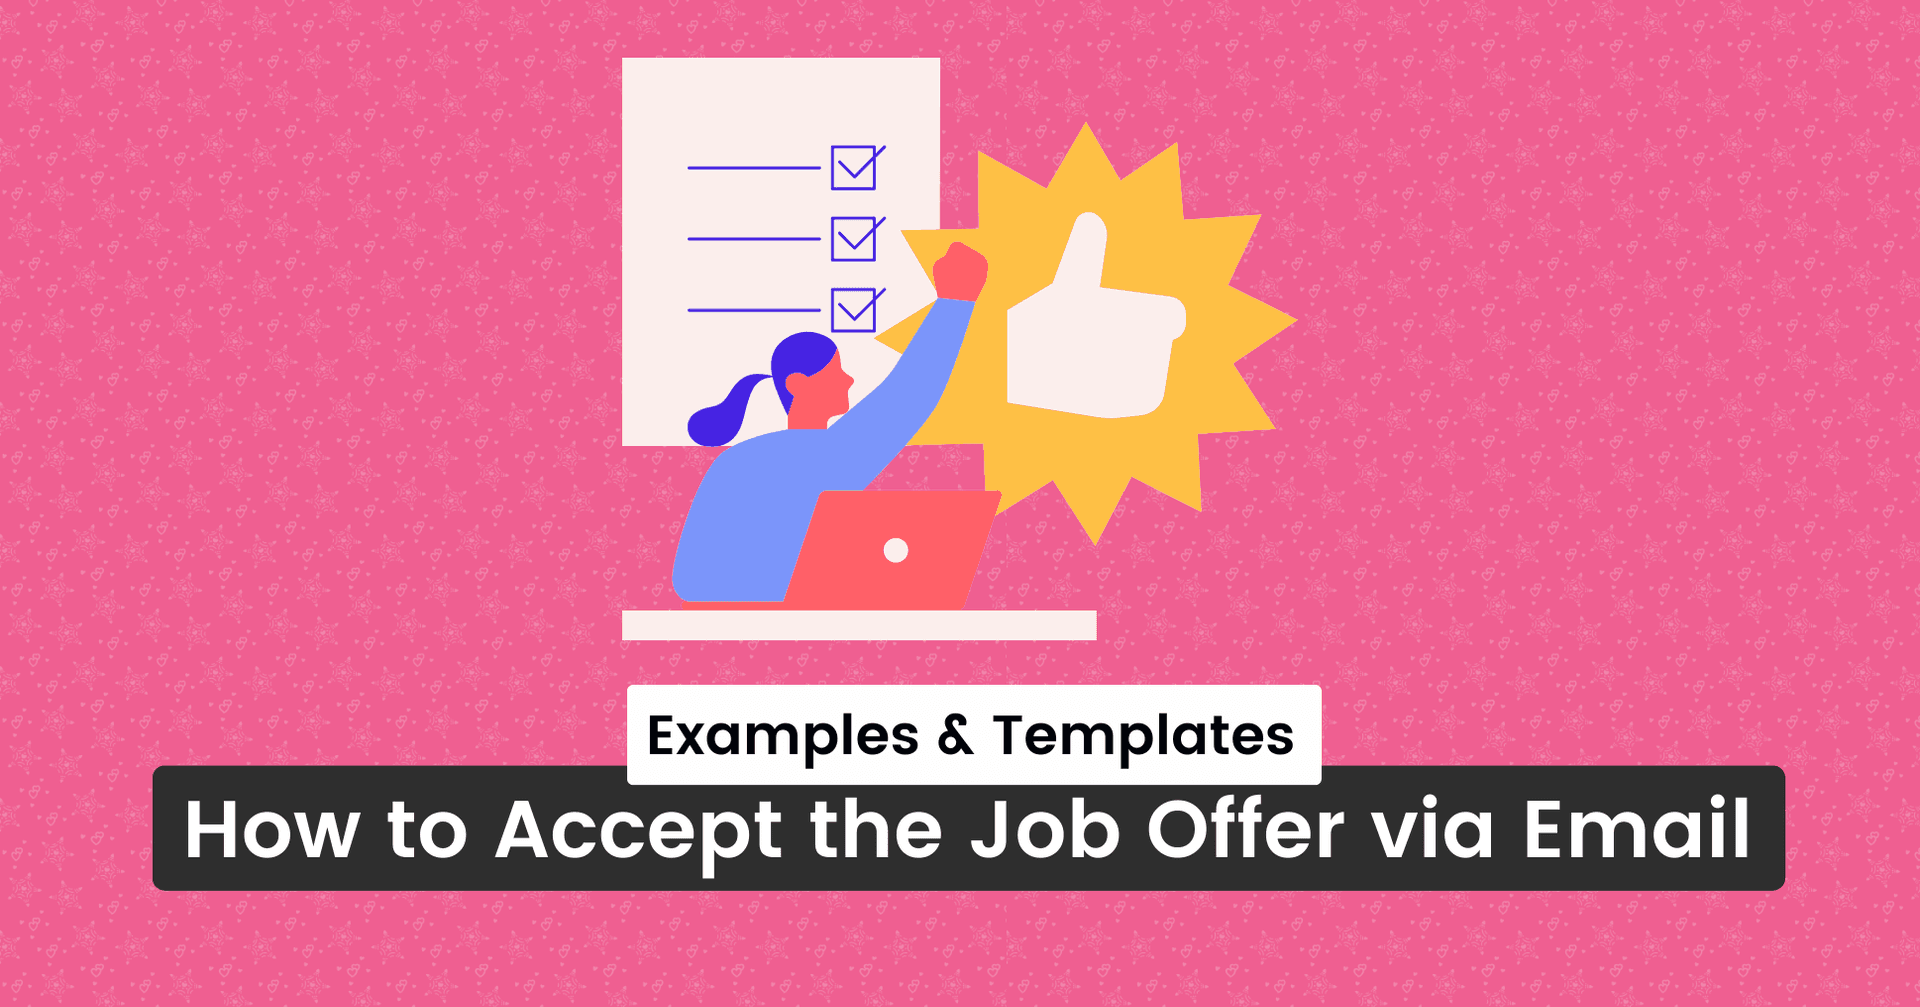 How to Accept the Job Offer via Email Examples & Templates